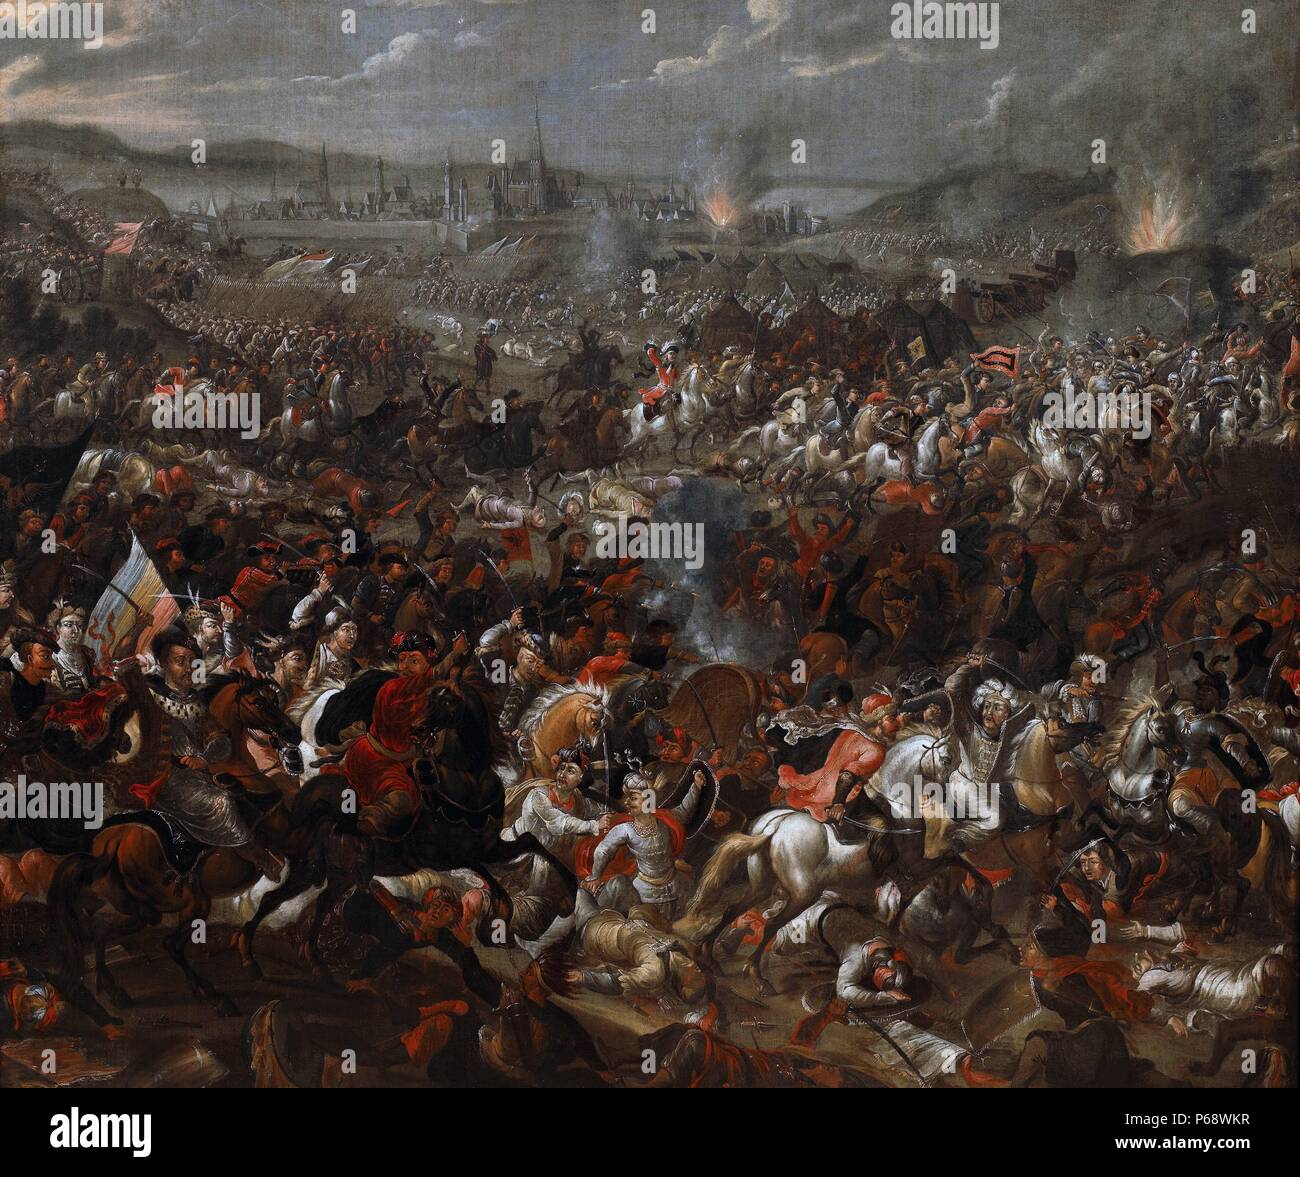 King John III Sobieski blessing Polish attack on Turks in Battle of Vienna 1683. Painted by Juliusz Kossak. John III Sobieski (Polish: Jan III Sobieski, Lithuanian: Jonas Sobieskis; 17 August 1629 – 17 June 1696), from 1674 until his death King of Poland Stock Photo